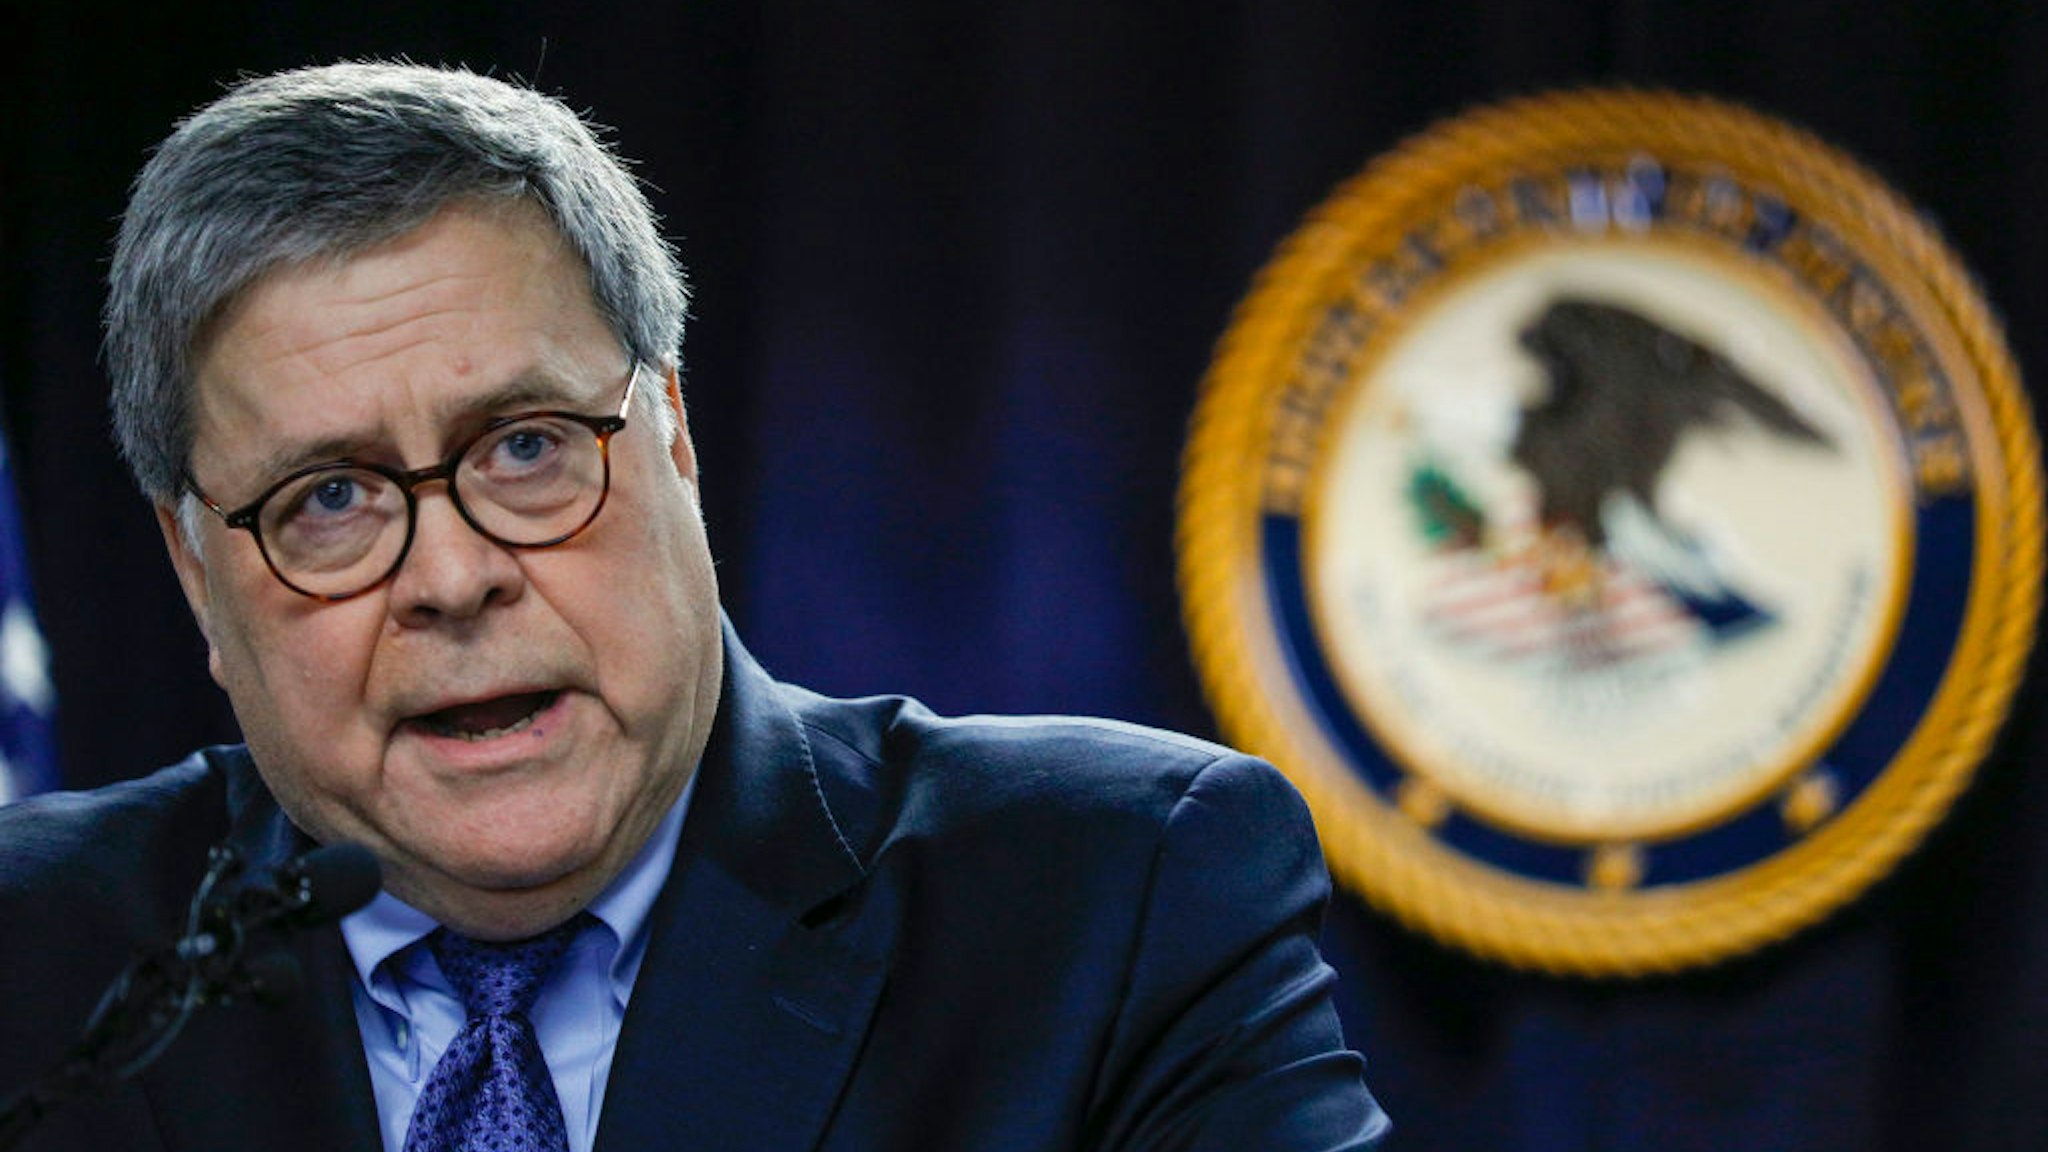 U.S. Attorney General William Barr announces a new Crime Reduction Initiative designed to reduce crime in Detroit on December 18, 2019 in Detroit, Michigan. (Photo by Bill Pugliano/Getty Images)